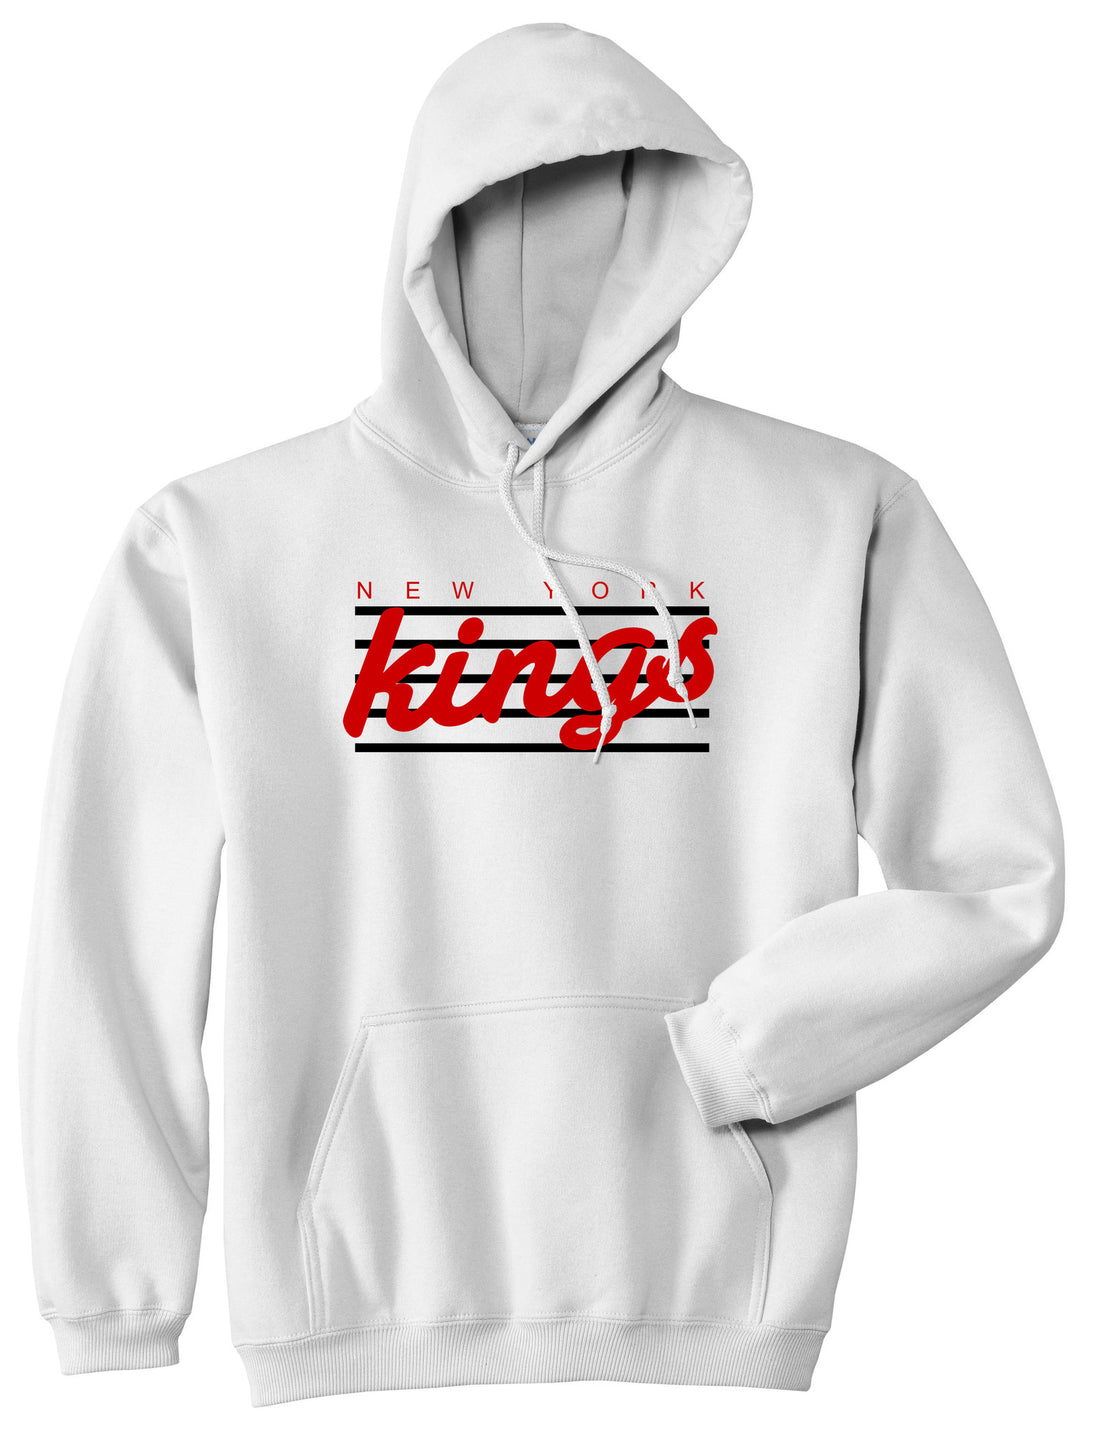 New York Kings Stripes Pullover Hoodie in White